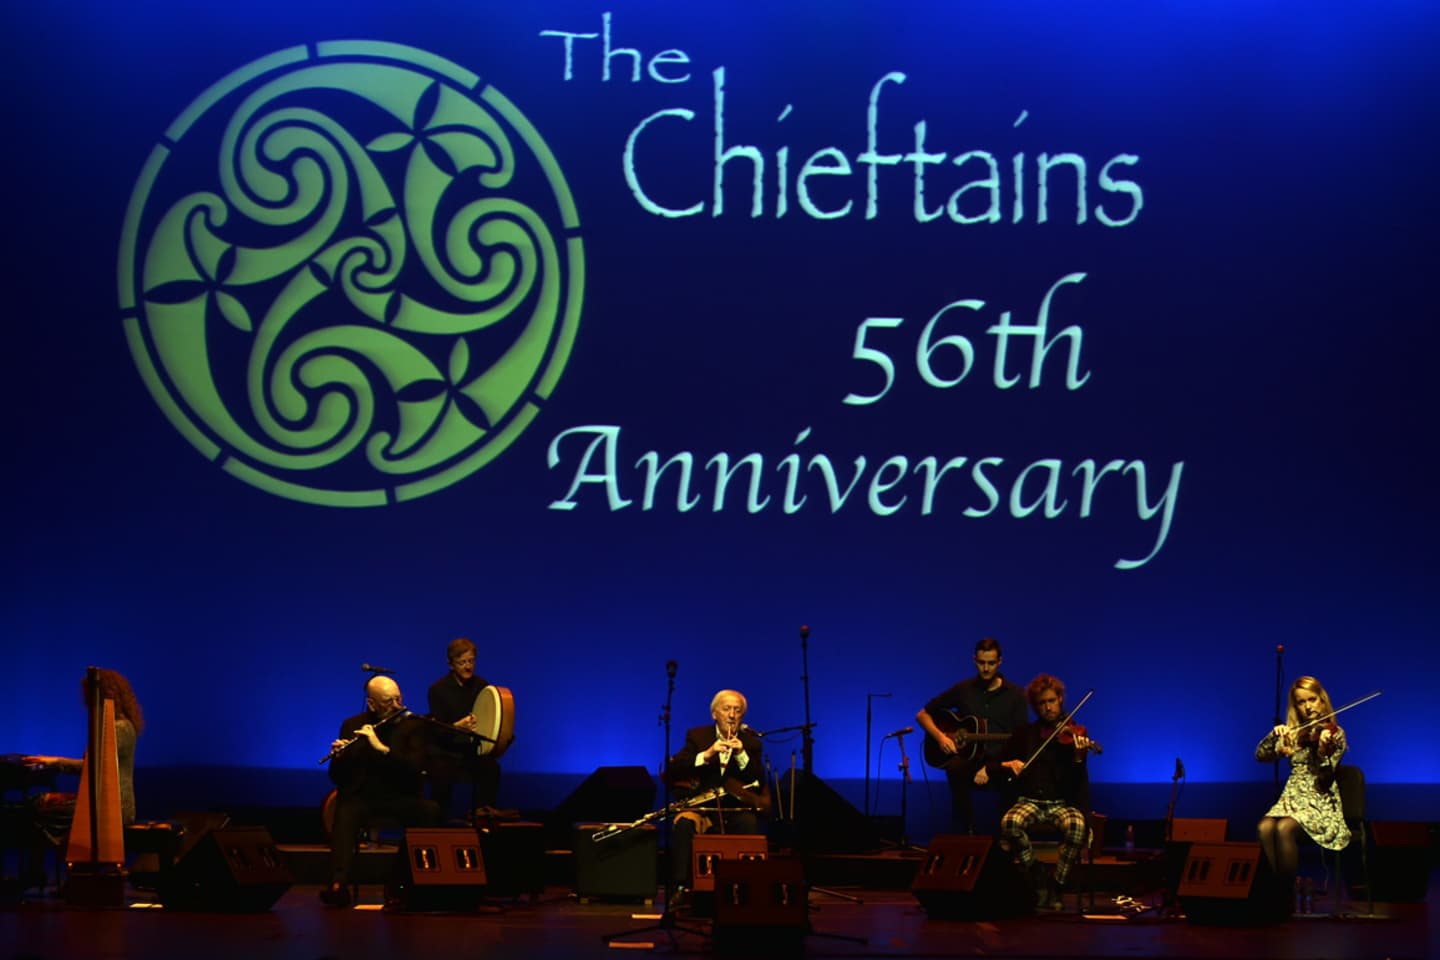 The Chieftains Tickets The Chieftains Tour and Concert Tickets viagogo